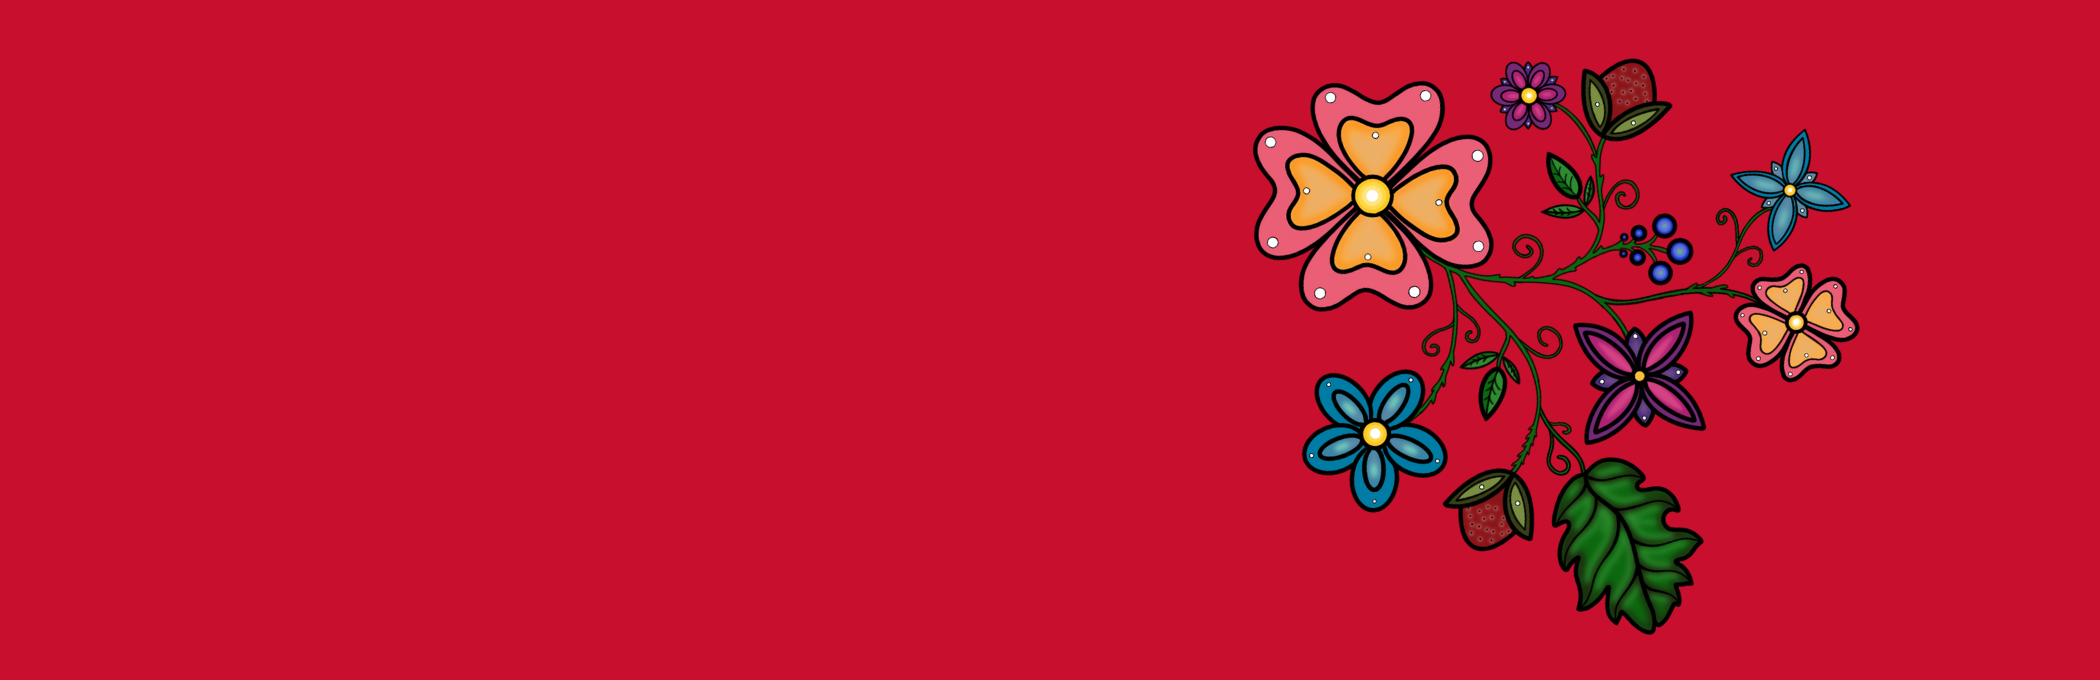 Indigenous artwork featuring vines, colourful flowers, and strawberries on a red background.